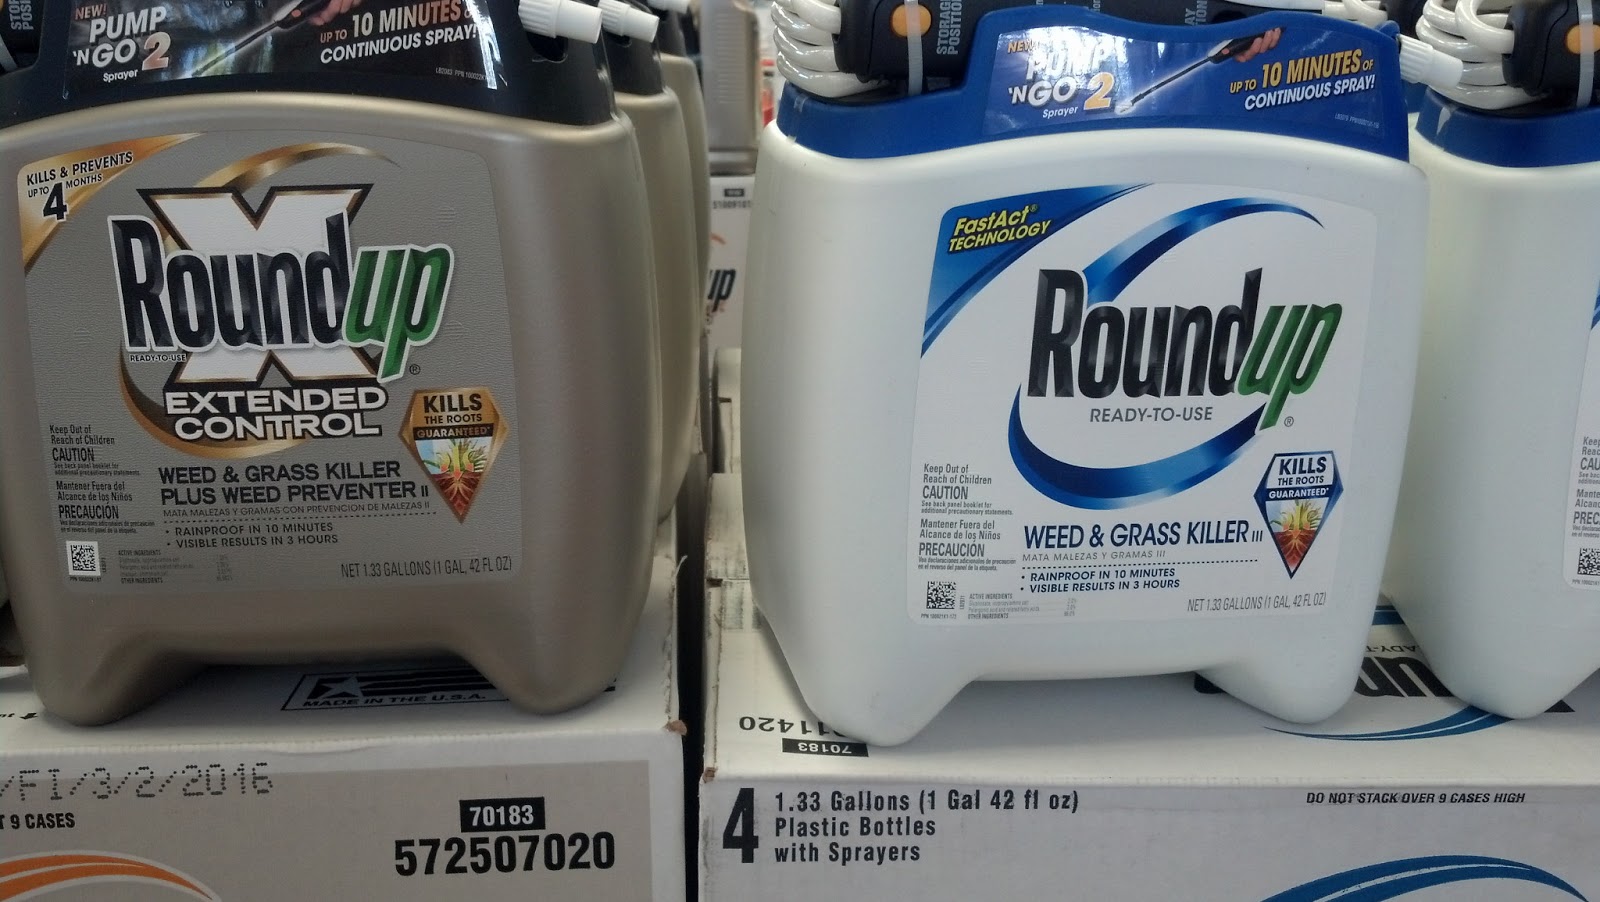 Roundup is more toxic than glyphosate